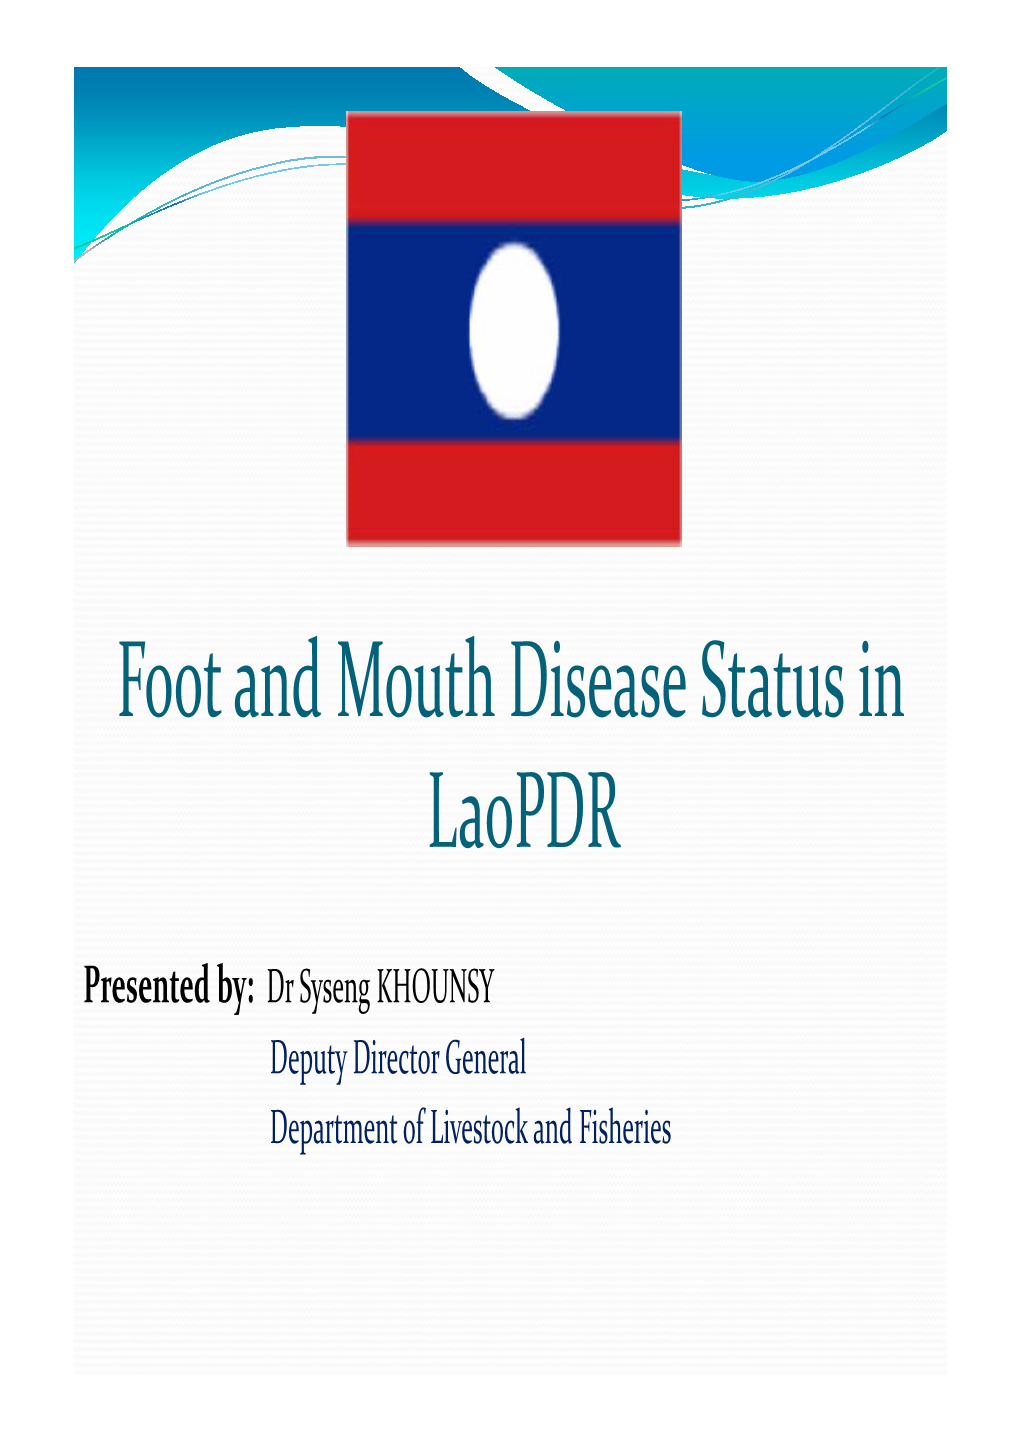 Foot and Mouth Disease Status in Laopdr